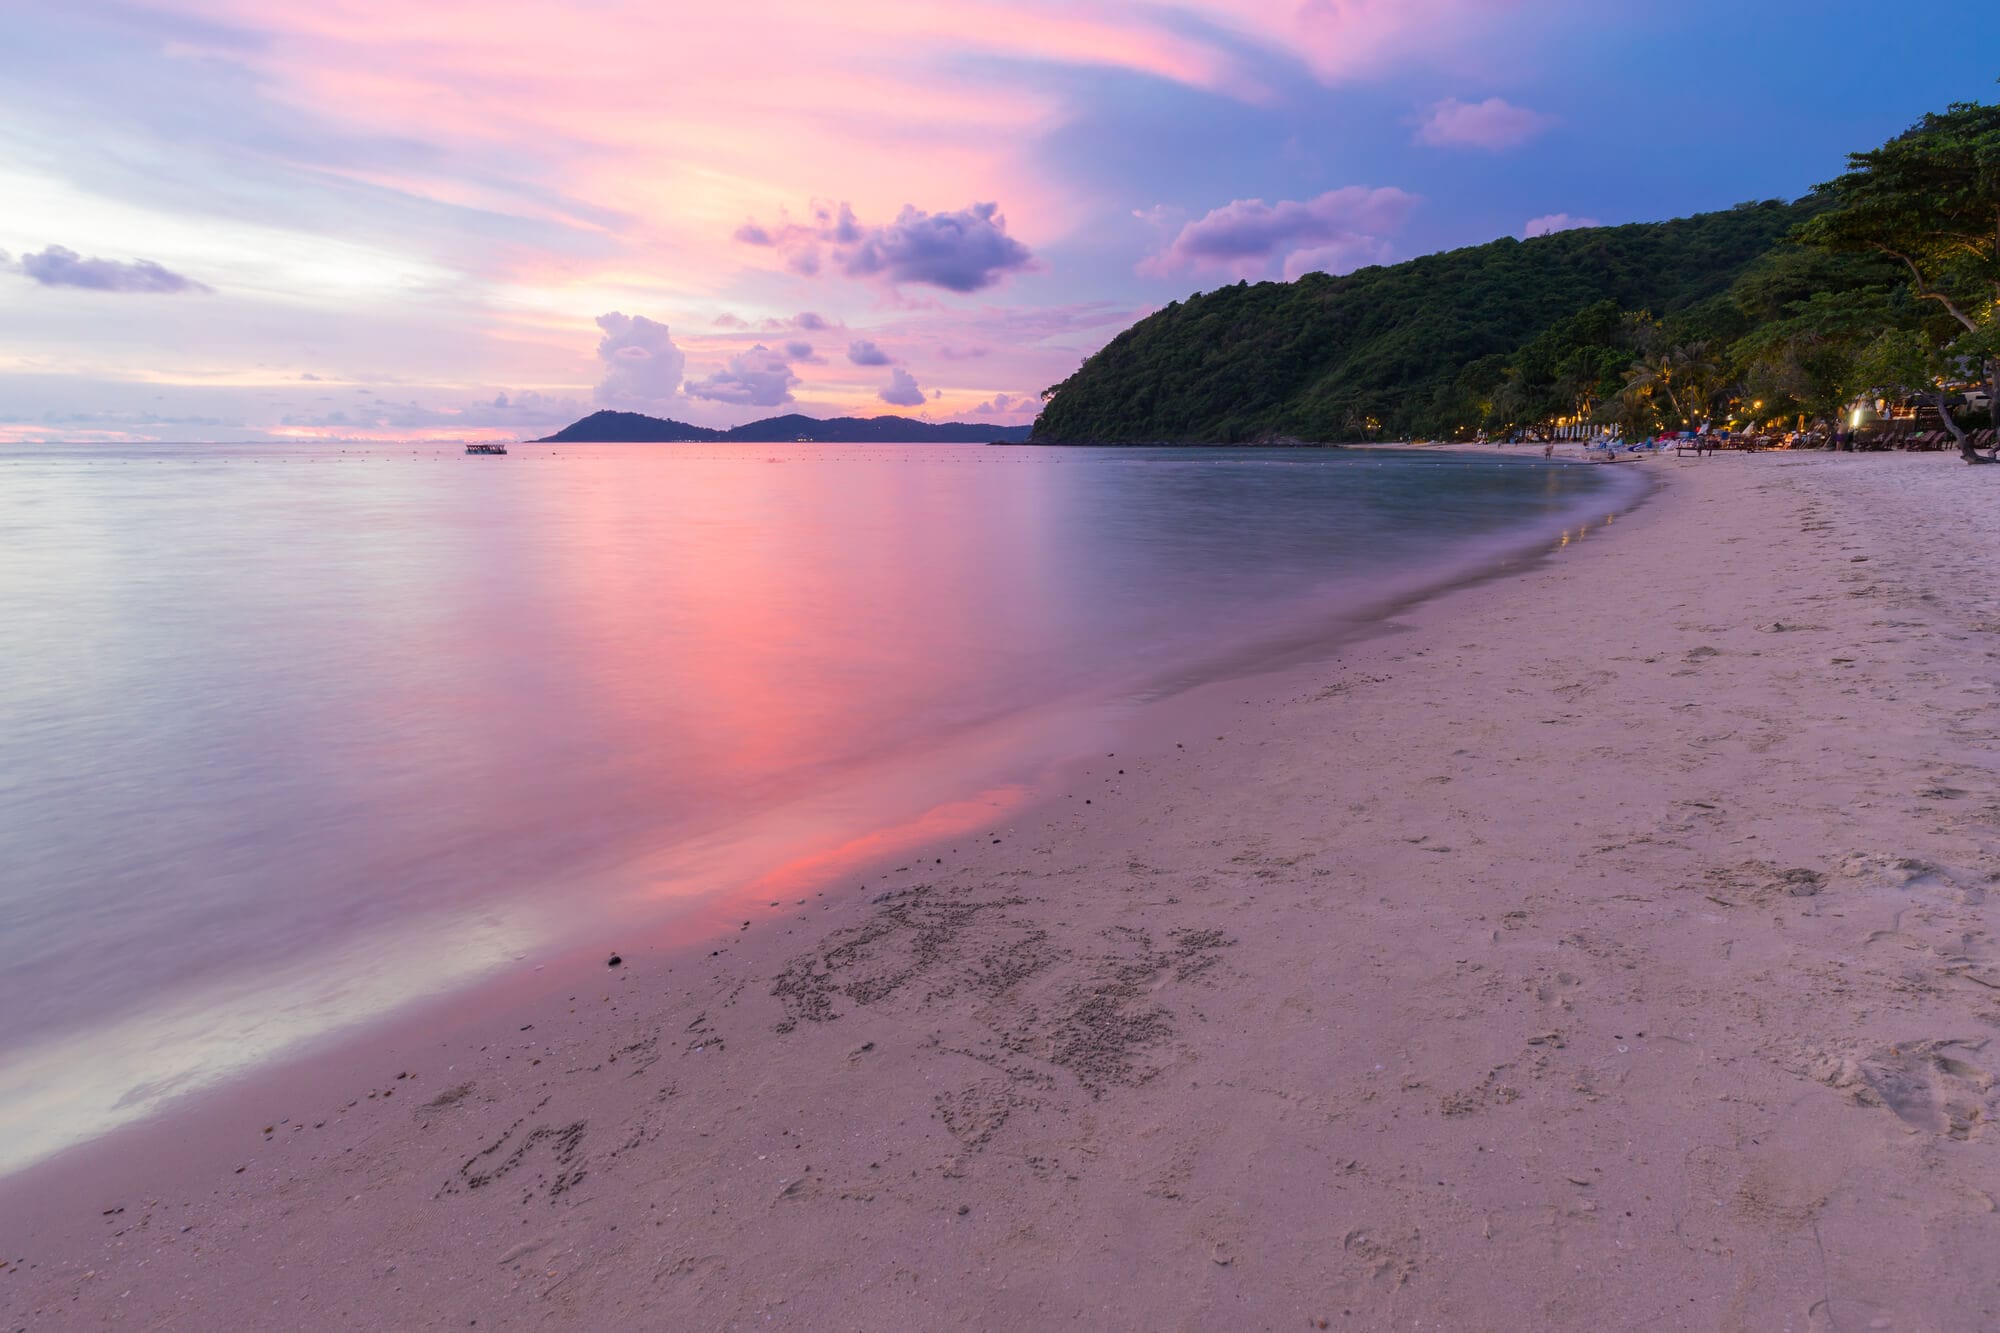 Blue, purple and pink sunset over Ao Prao Beach in Koh Samet.